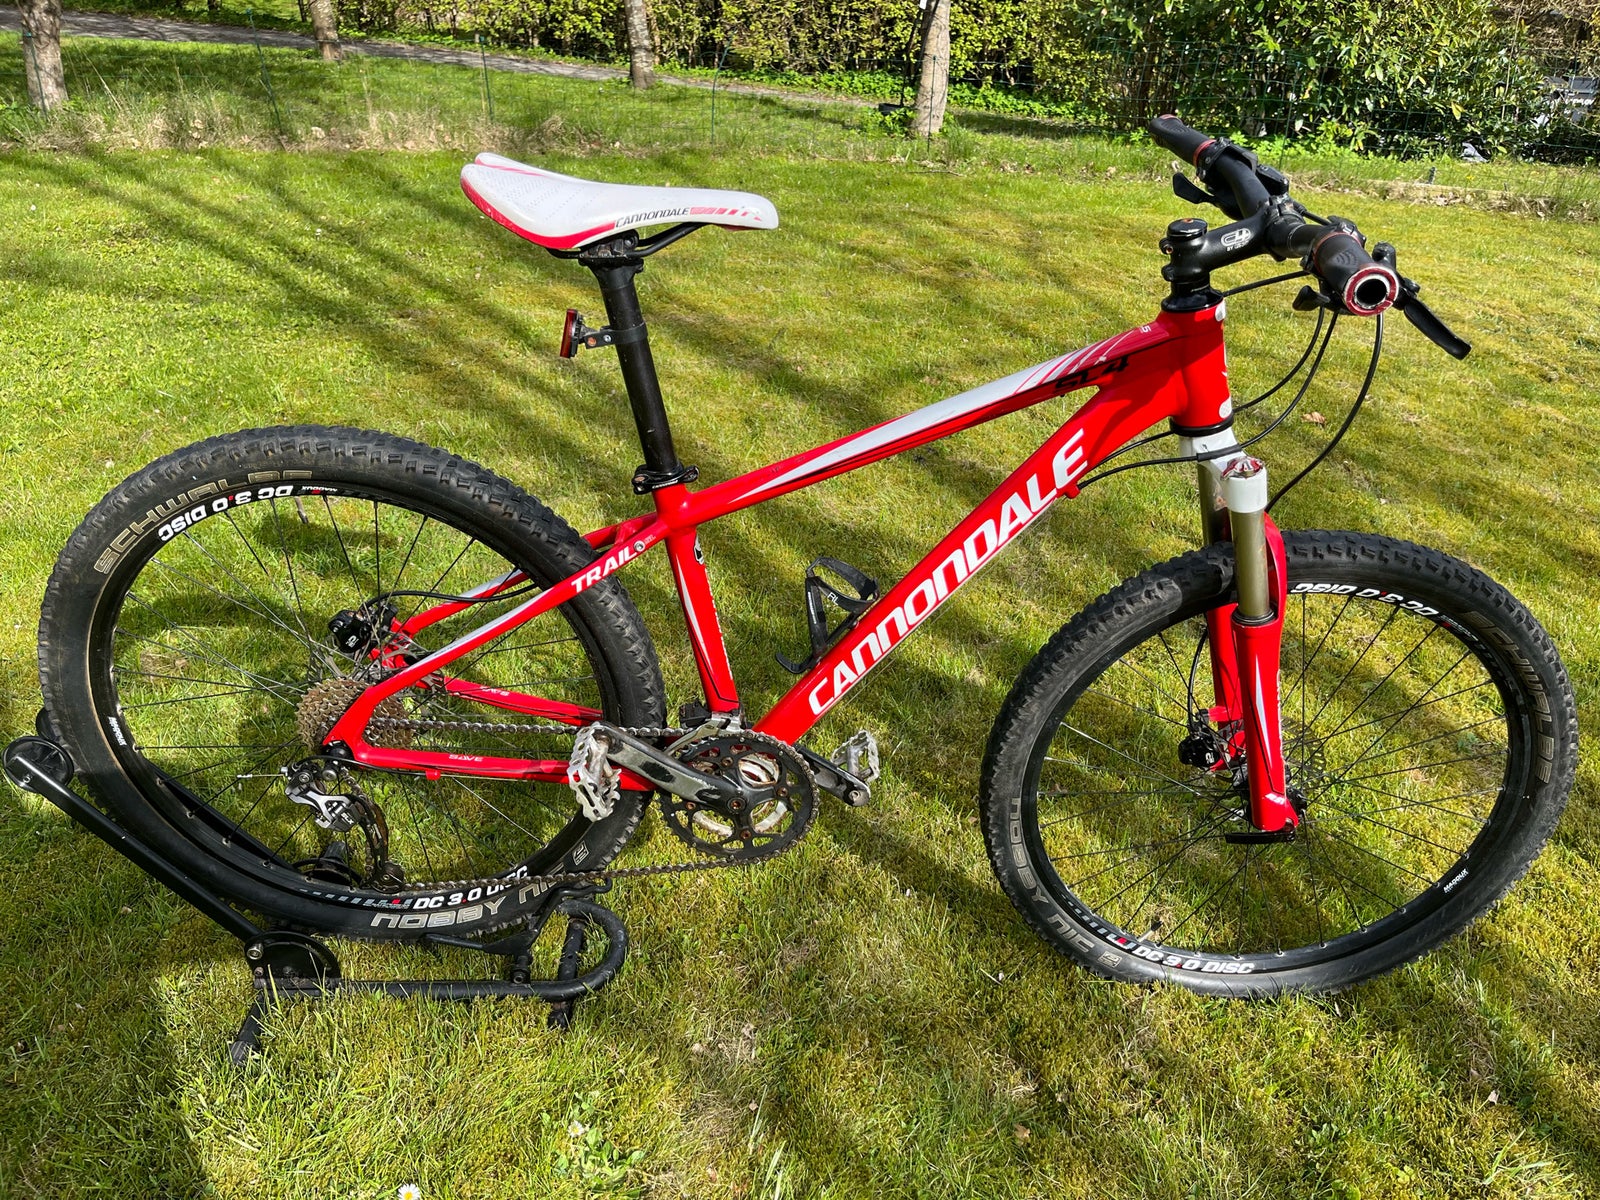 Cannondale Save, hardtail, S tommer